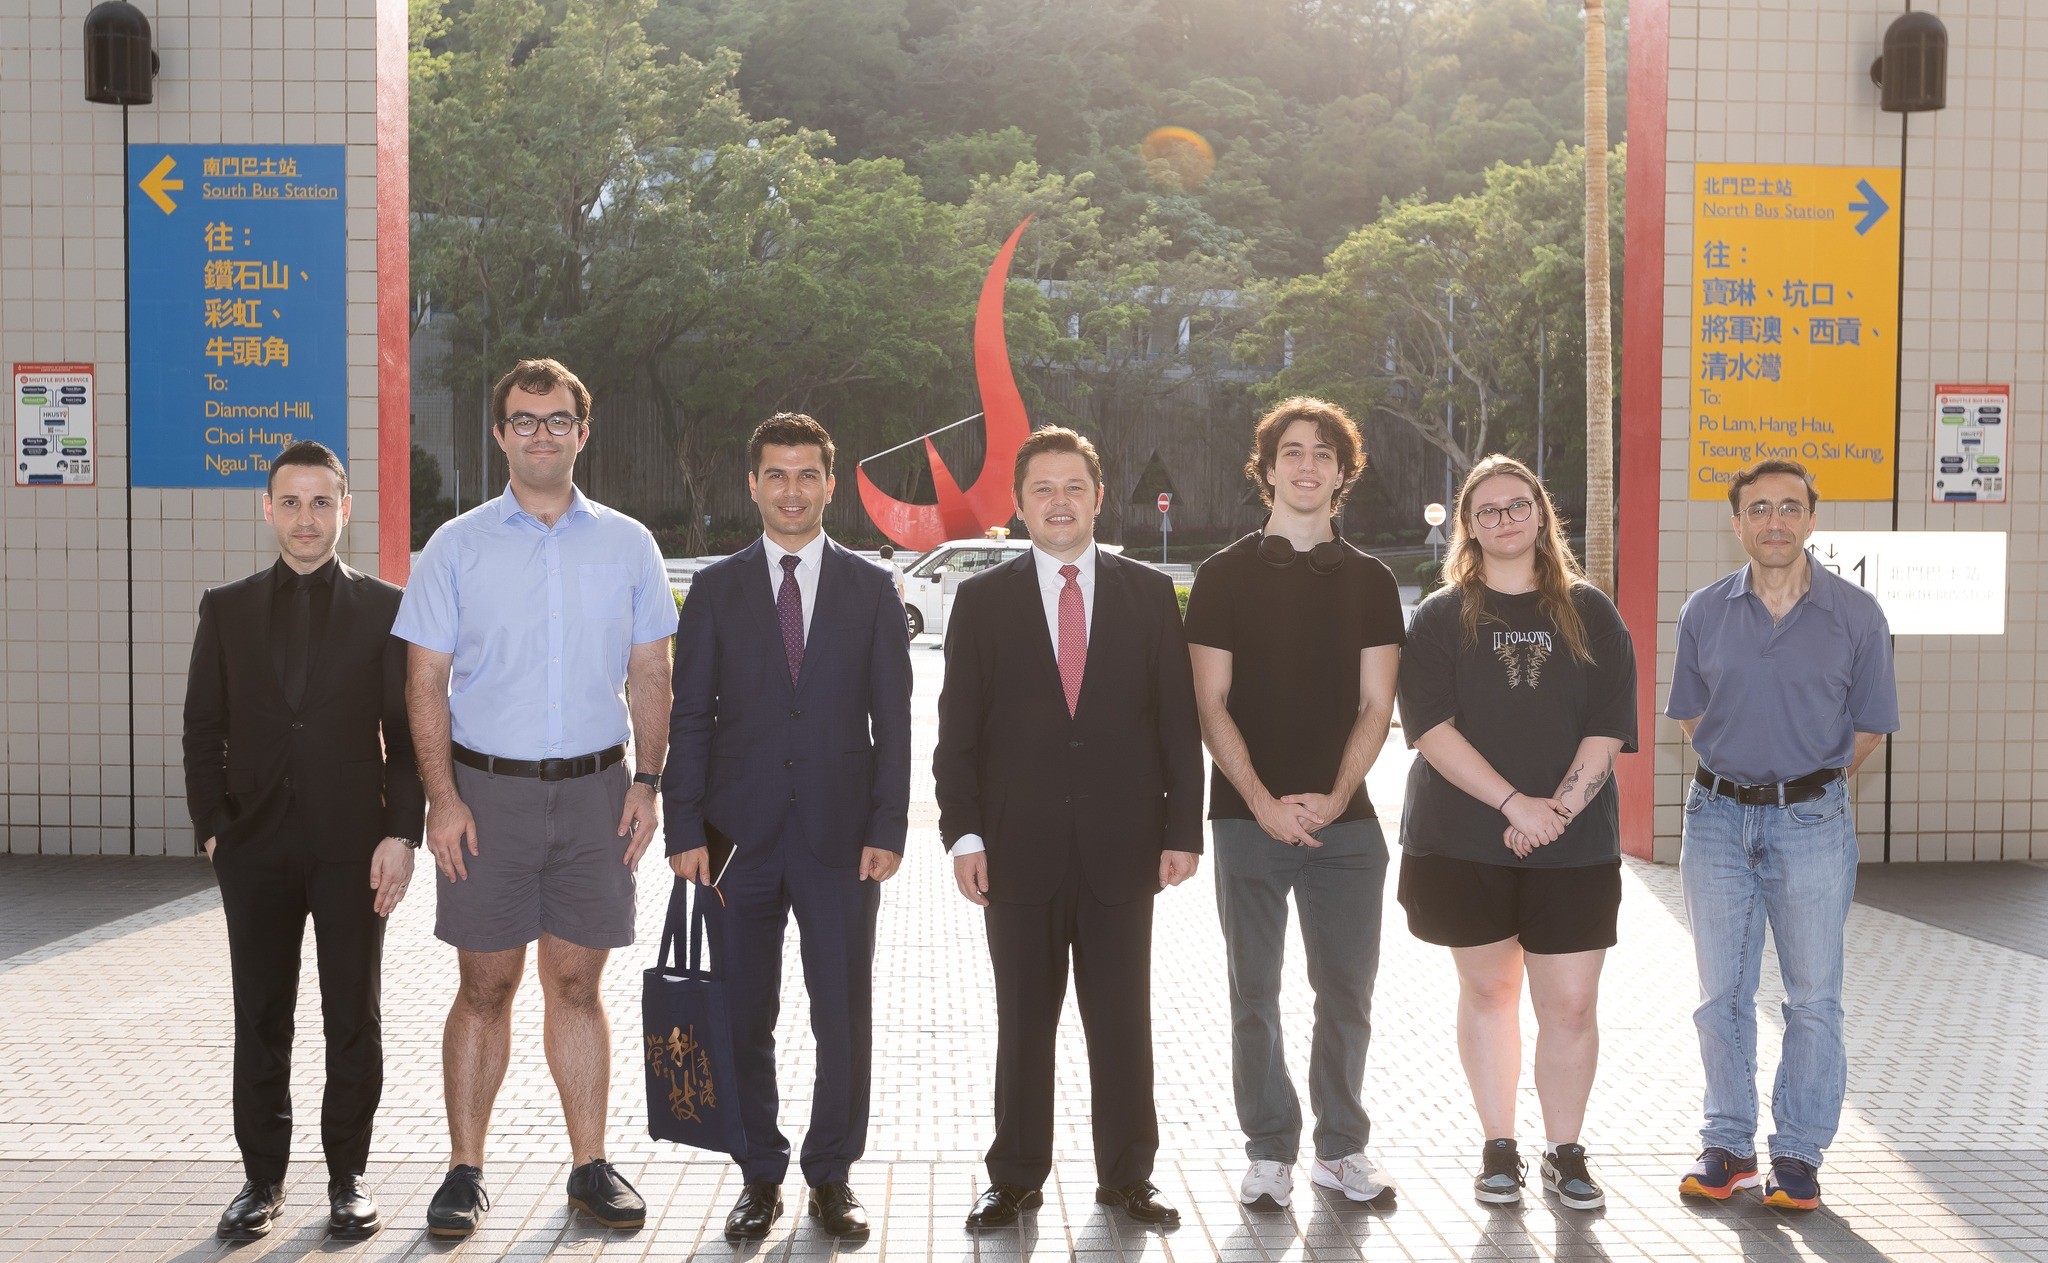 Consul General Evcin and his delegation takes a photo in front of the iconic “Red Bird” sculpture at the Piazza.